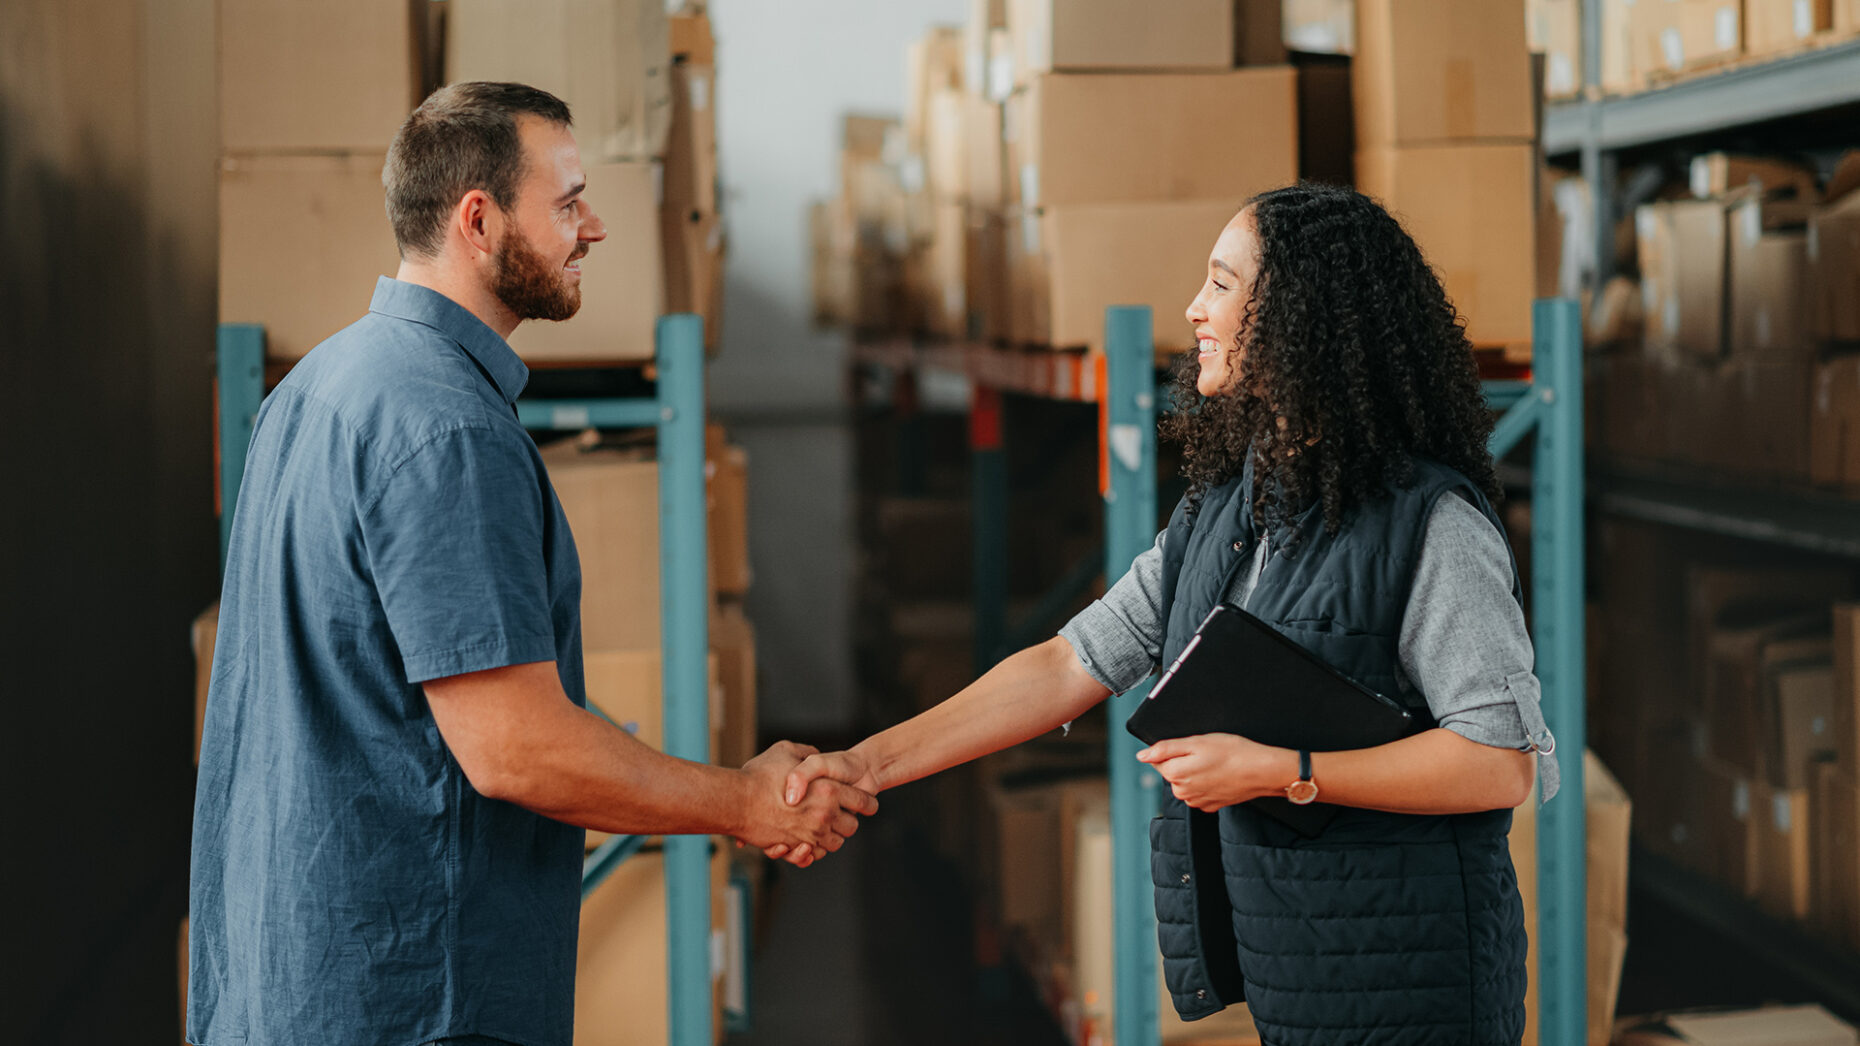 Shipping, supply chain and delivery partner with handshake for partnership, support and thank you in a warehouse. Box logistics or stock factory employee with teamwork, collaboration business meeting